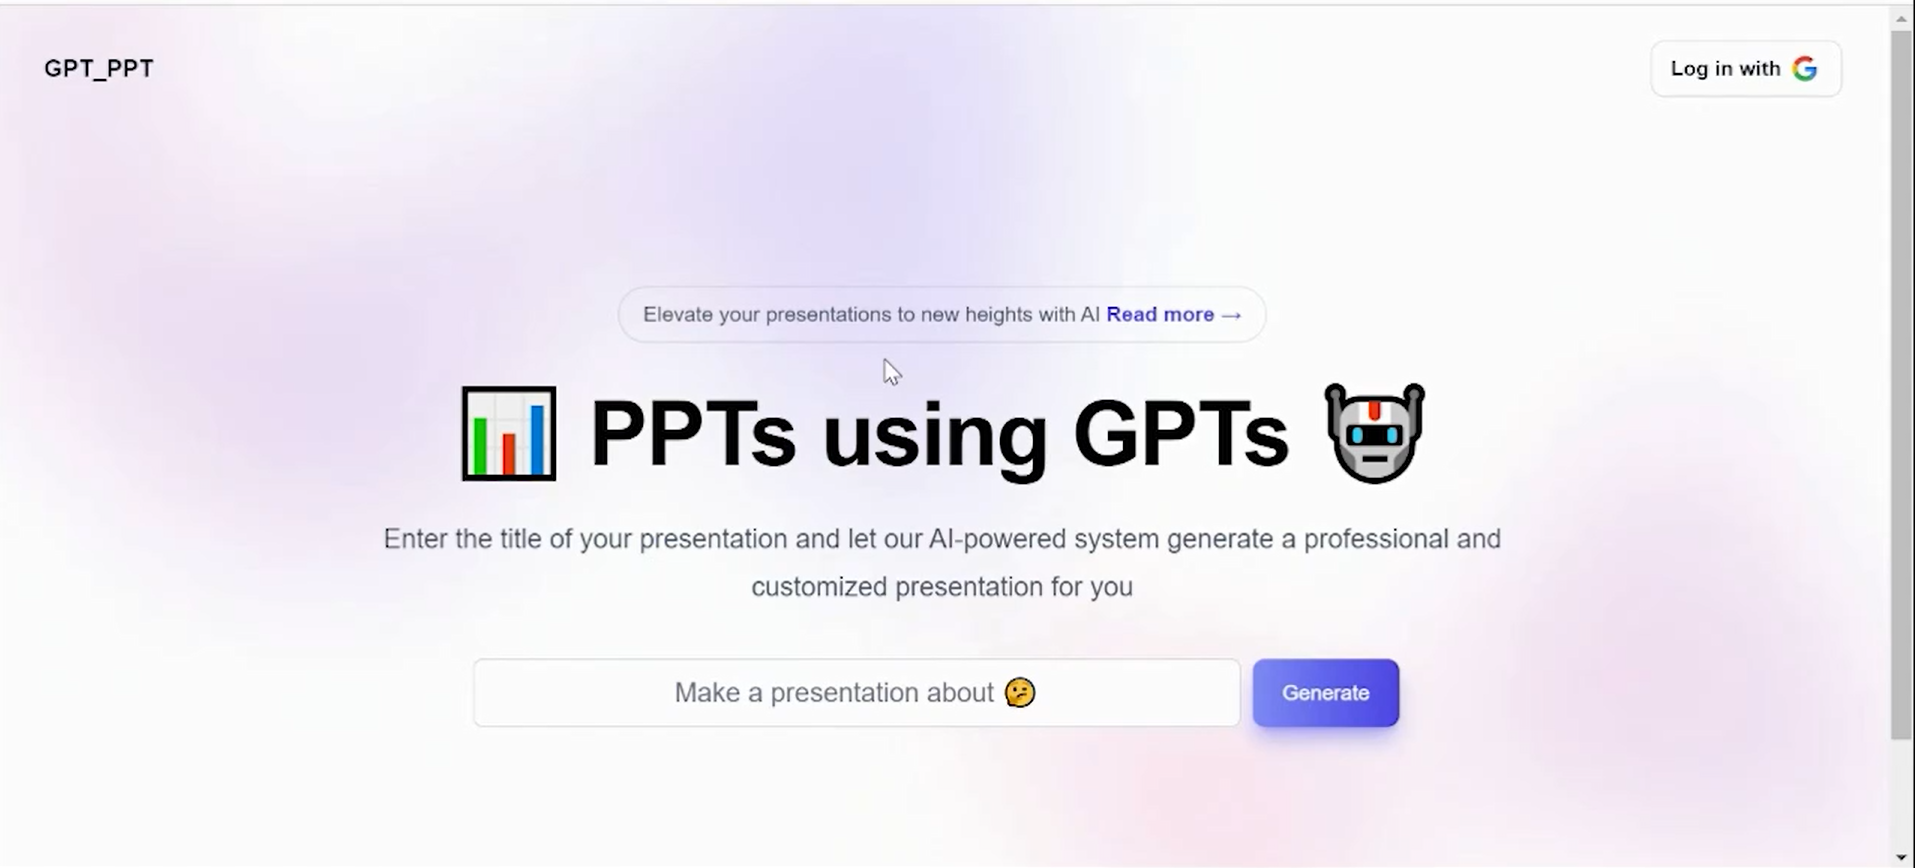 PPTs using GPTs Landing page